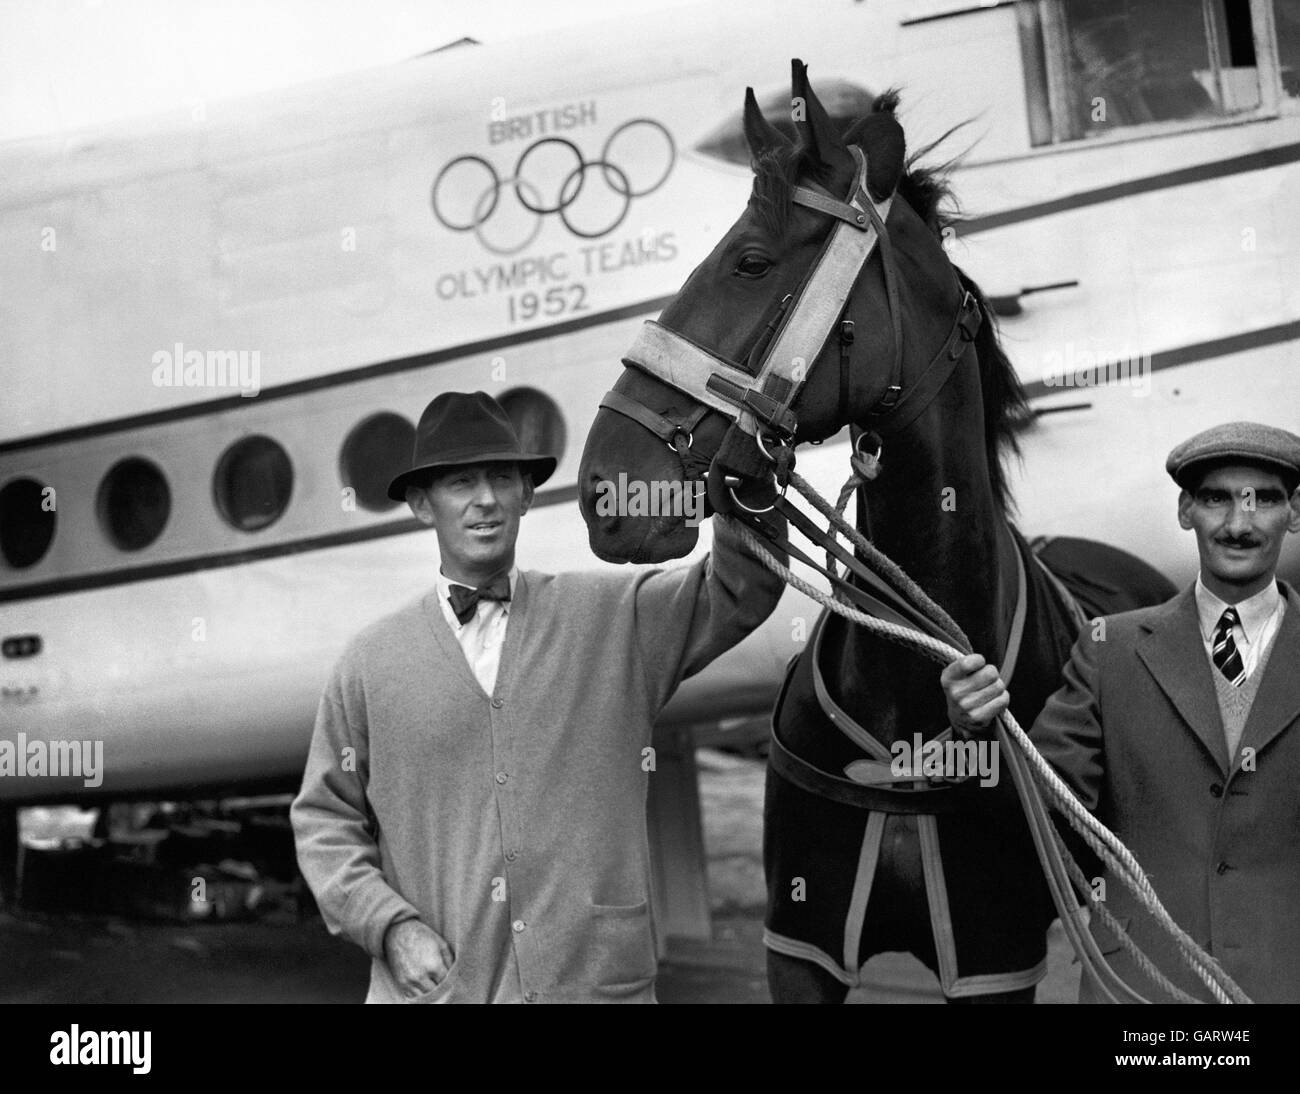 Lieutenant-Colonel Henry Llewellyn with his horse Foxhunter, before boarding the Olympic plane for Helsinki. He won the Team Show Jumping gold medal. Stock Photo